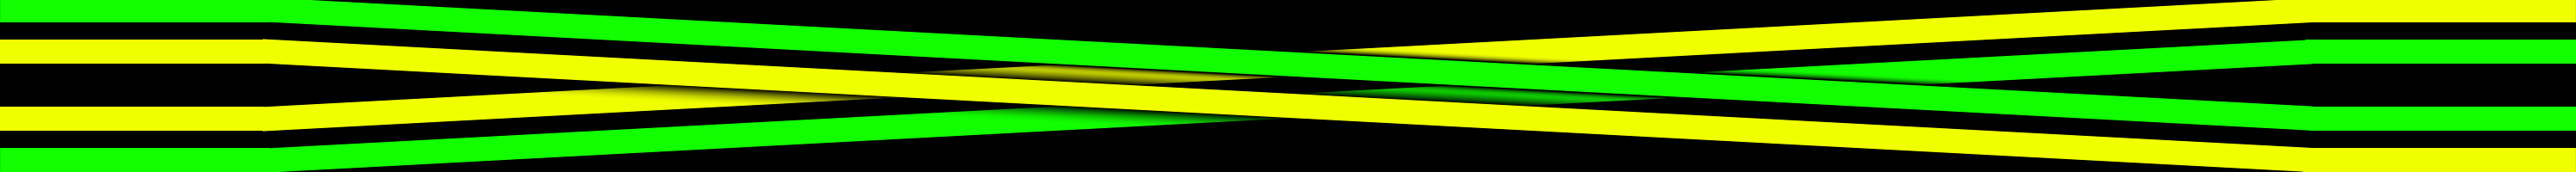 swapDoubleD greenYellow 3Dcross